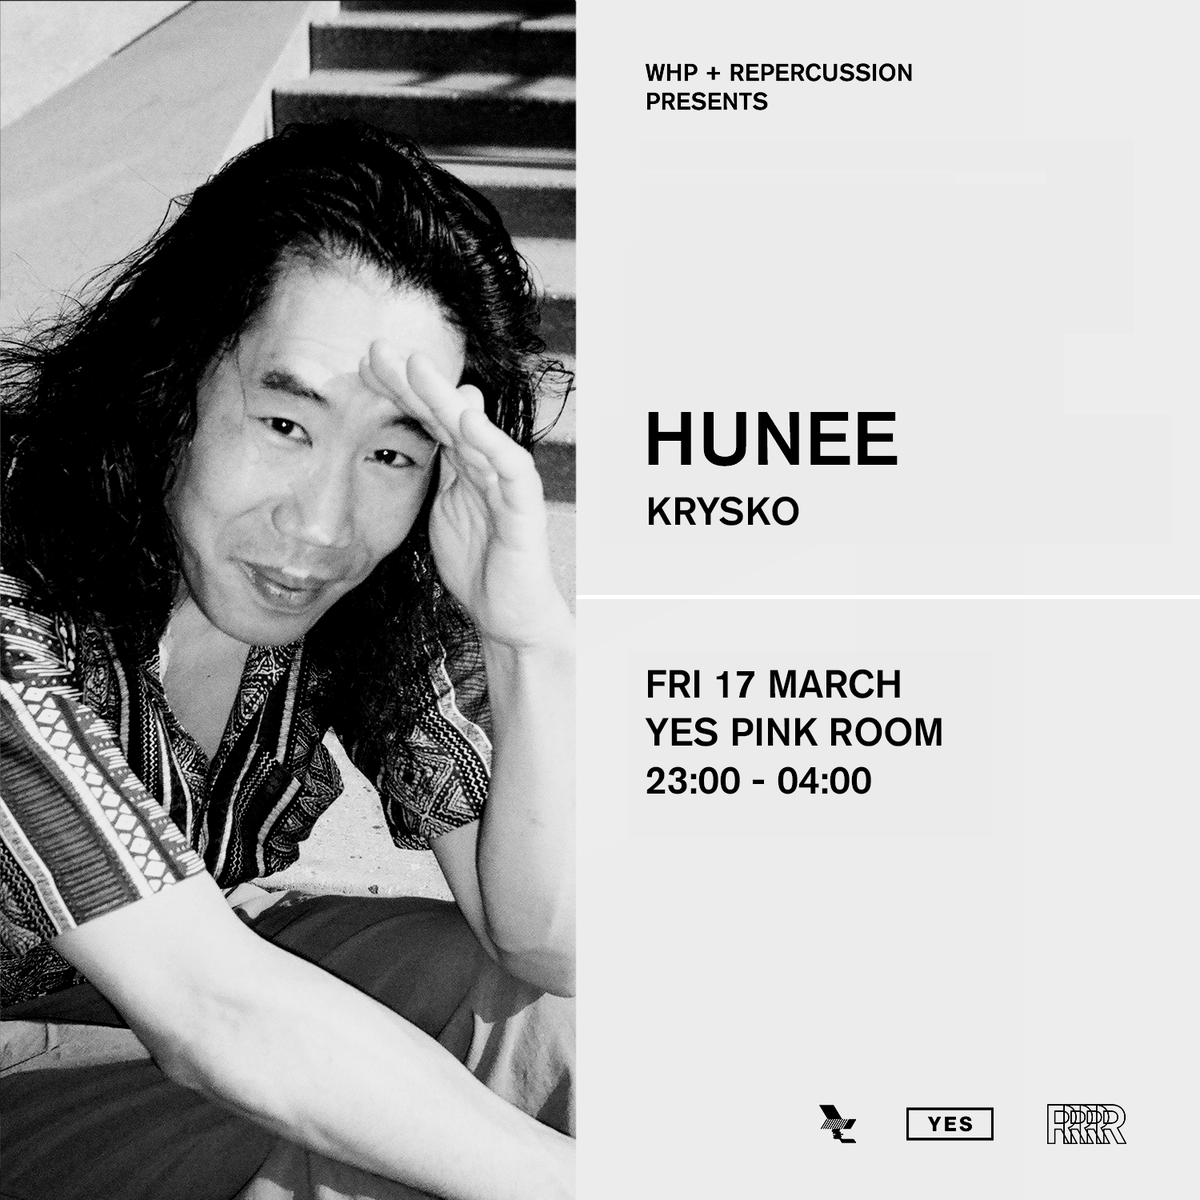 Just announced: @WHP_Mcr and Repercussion presents: Hunee, Friday 17th March 2023, 11pm-4am [The Pink Room] Tickets go on sale Thursday 23rd February at 10am seetickets.com/event/repercus…